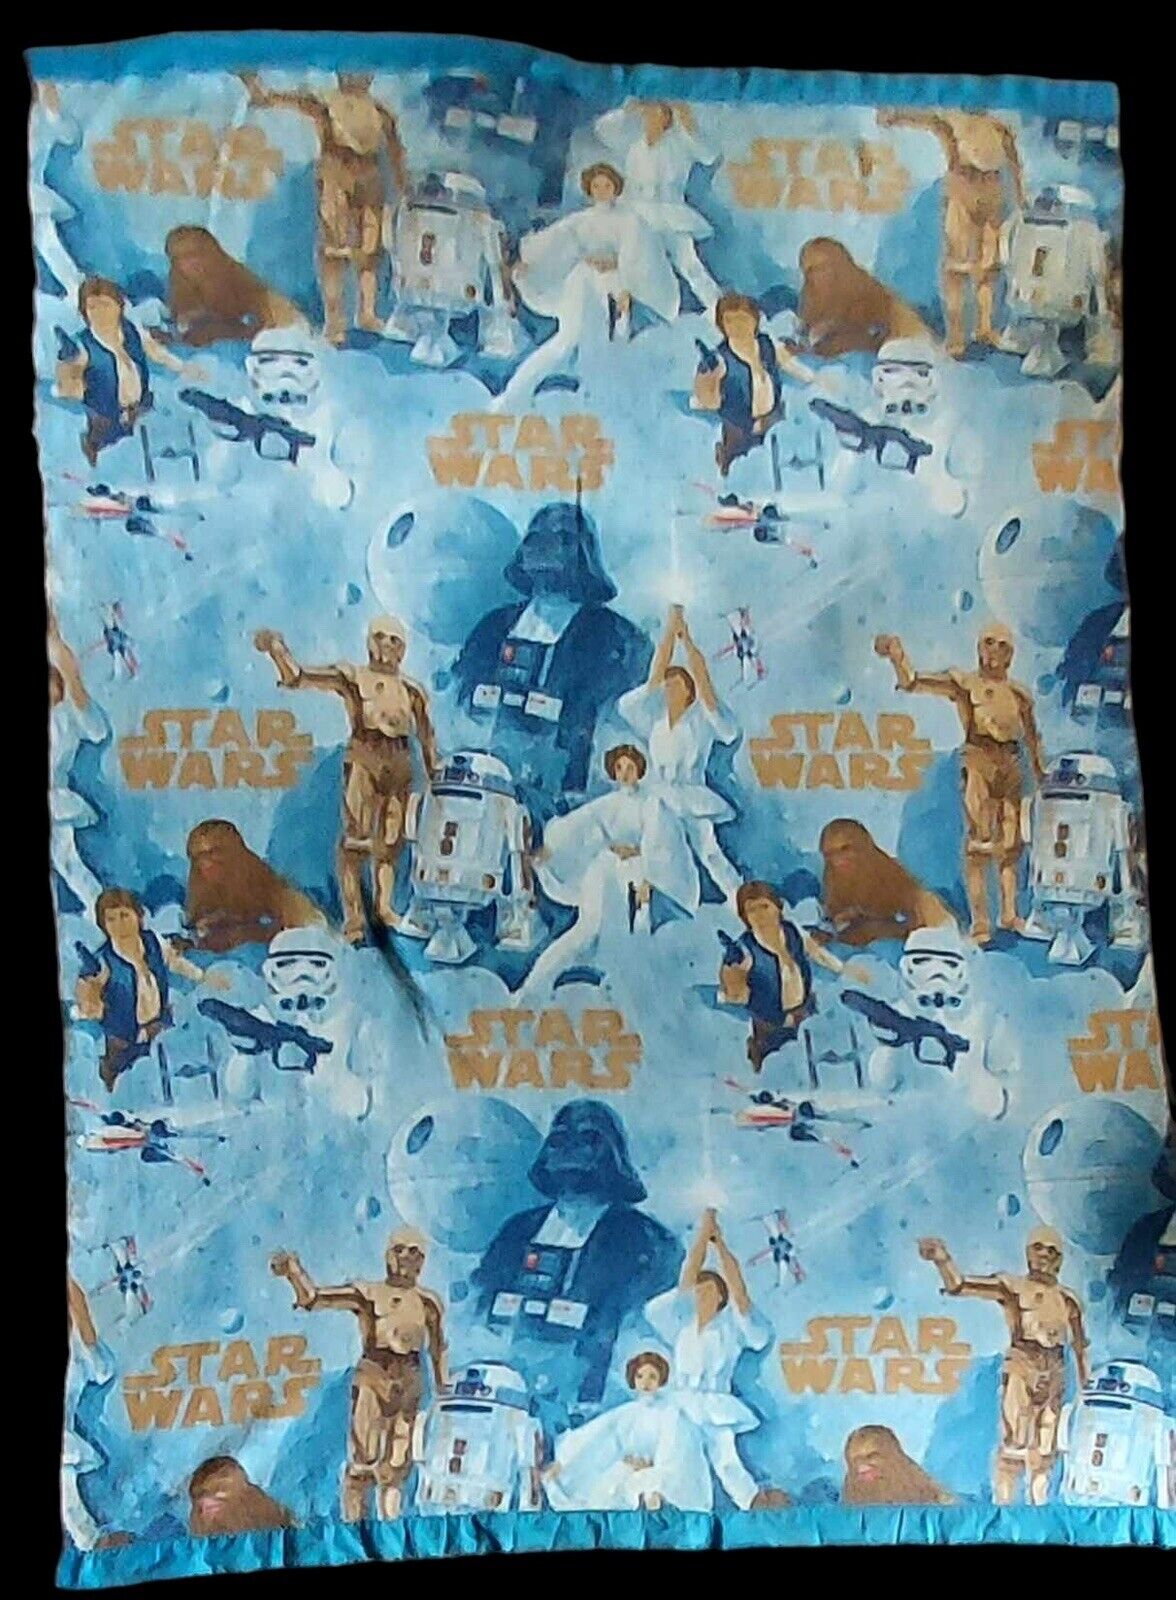 Vintage Star Wars Blanket 88x64 Needs Small Repair By Hand Or Machine Easy Fix